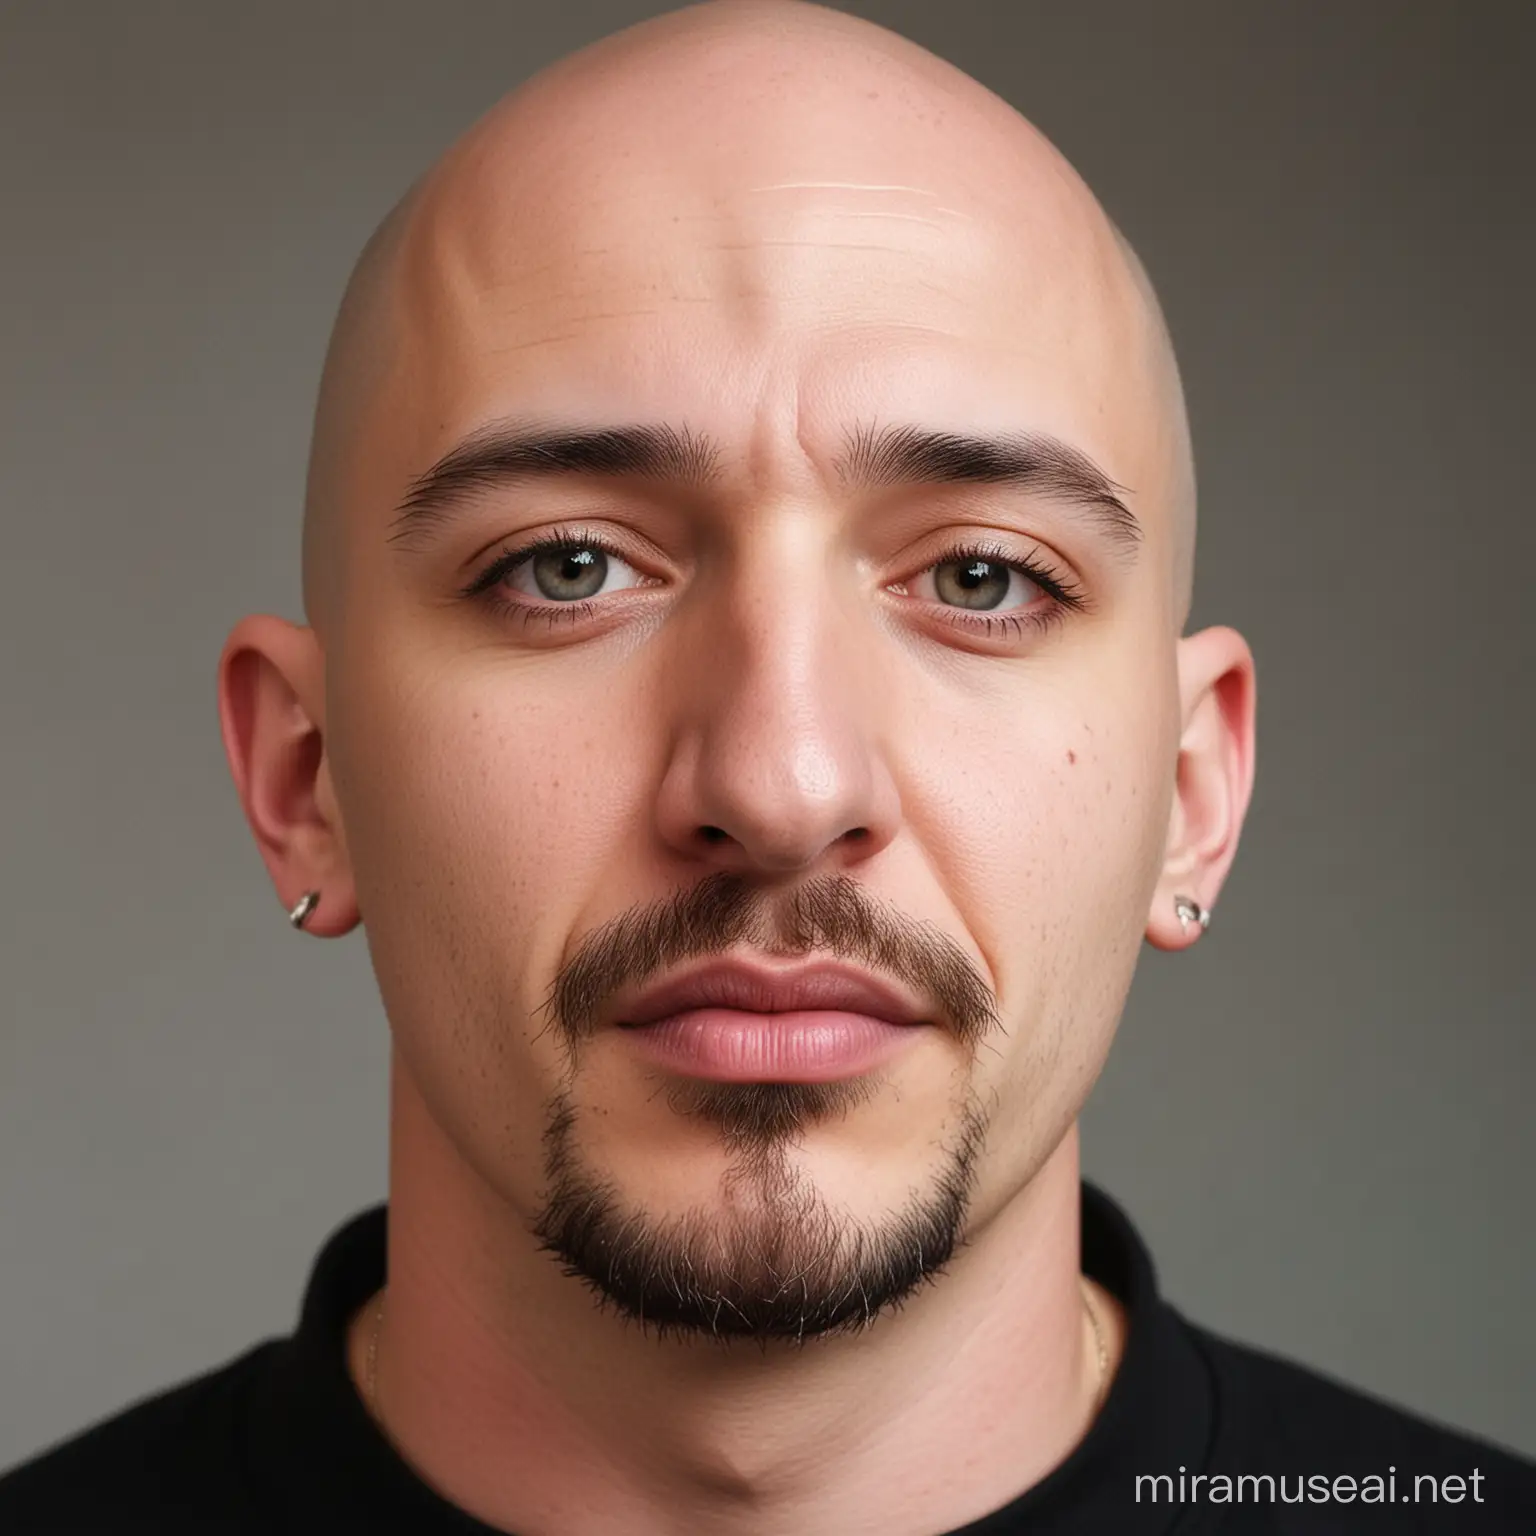 A bald man with a short goatee and a large nose piercing protruding from each nostril